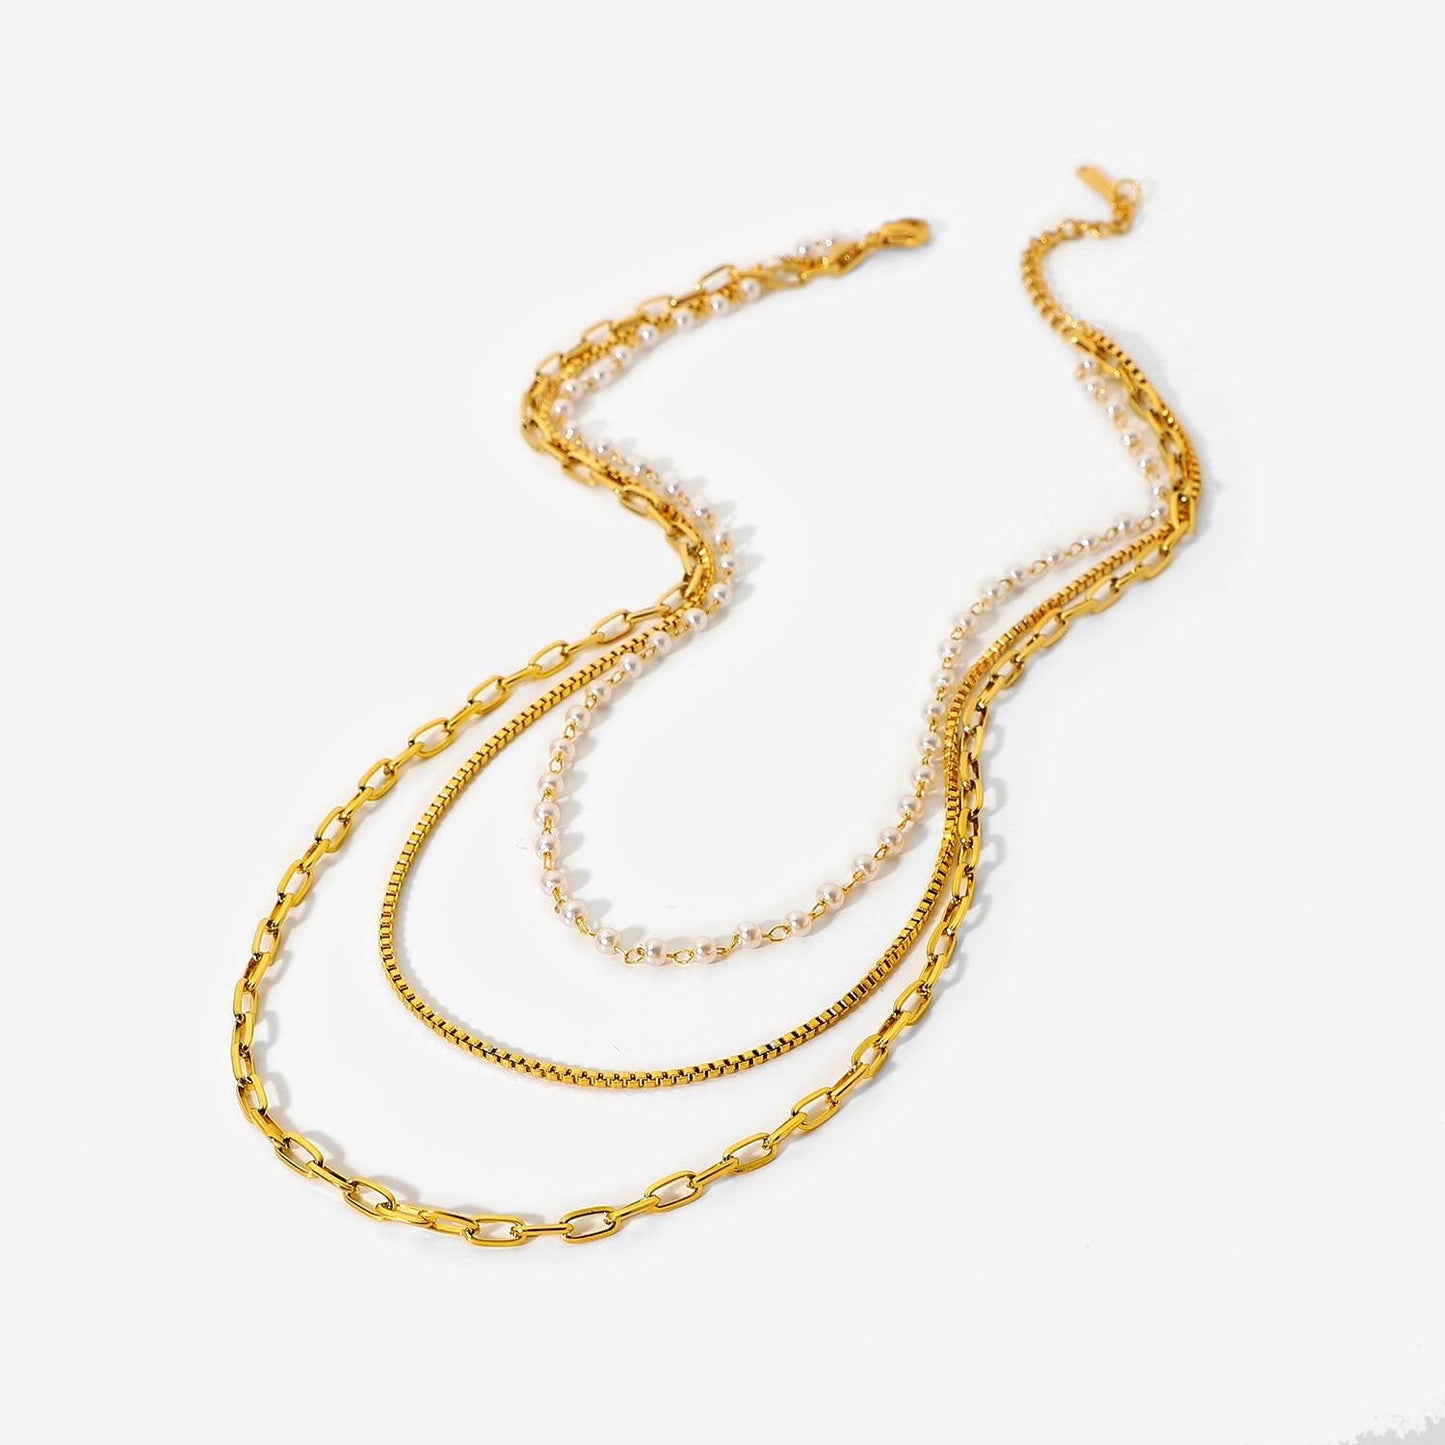 N33.Small Pearl 18K Gold Chain Three Layer Necklace Women - Elle Royal Jewelry